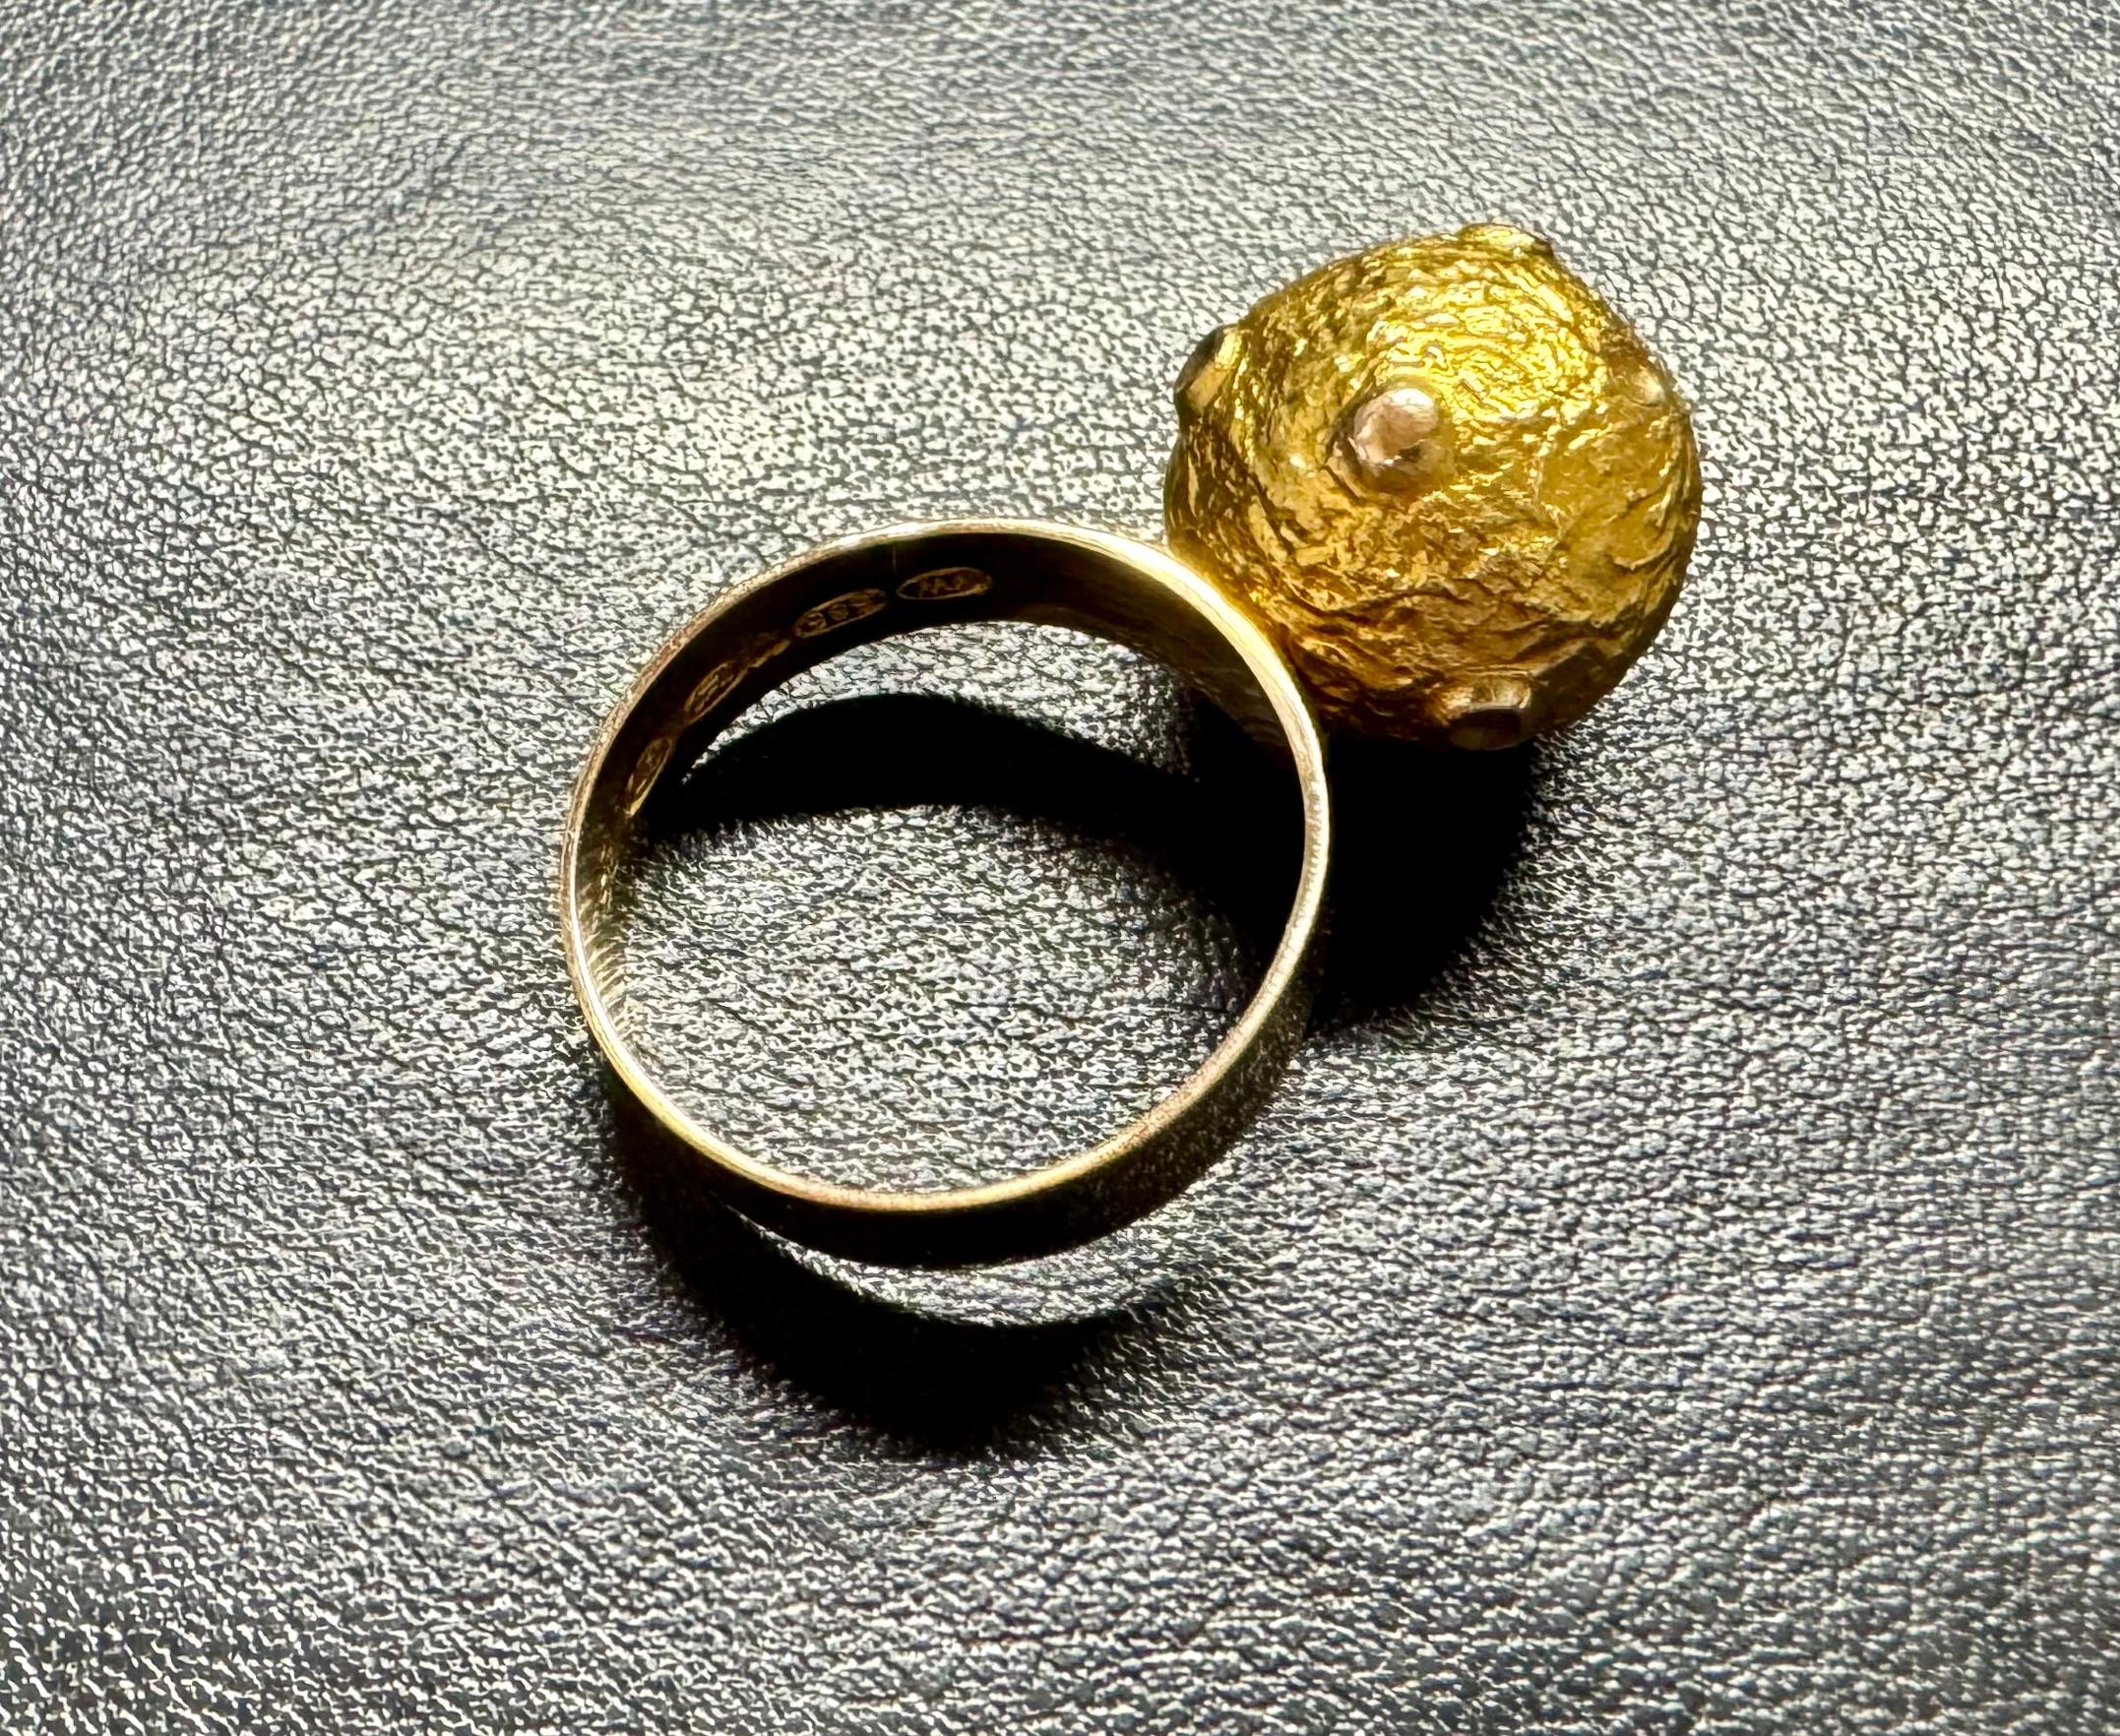 A really nice Gold Ring from 1967.
Would it be the Moon or another Planet.
Designer Helsinki Sarvala, Boris BS 1948-1974.
Made in Helsinki Eino Westerback NW.
The best of Scandinavian jewelry design
Weight 6 Grams.
Size 18mm=US 8